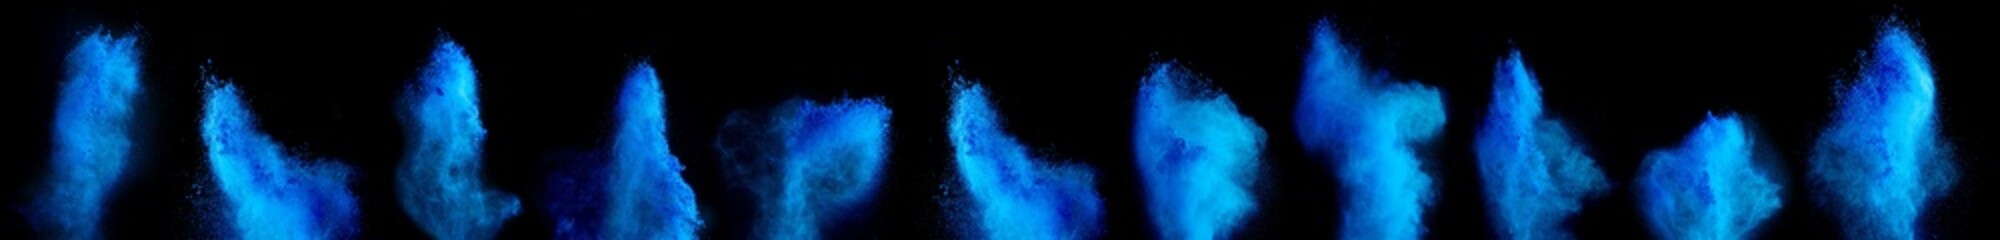 set collection row cyan blue holi paint color powder explosion isolated on dark black background. industry beautiful party festival concept